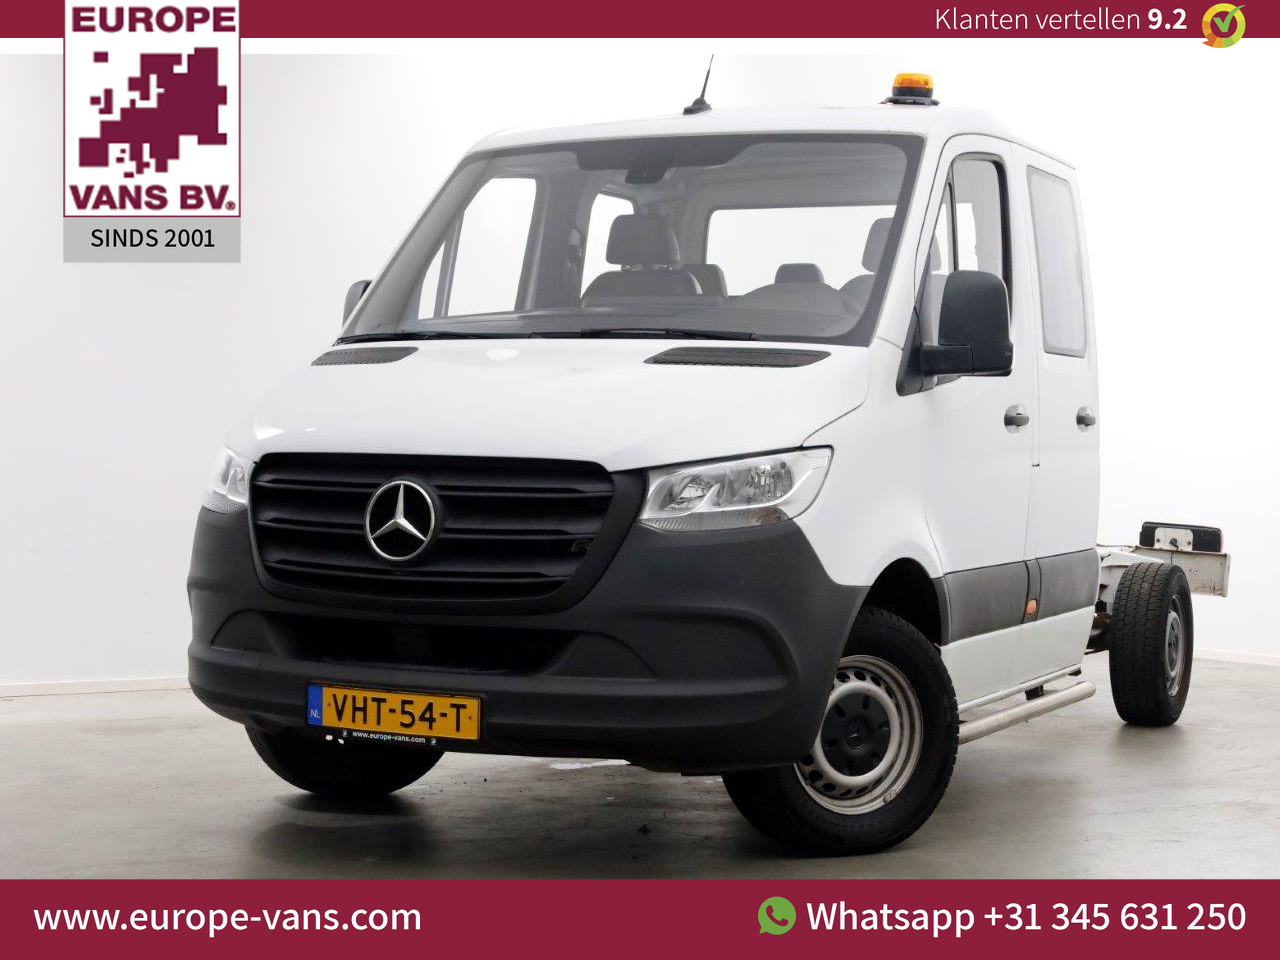 Mercedes-Benz Sprinter 311 CDI 115pk E6 RWD D.C. L2H1 WB366 Chassis Cabine (Fahrgestell) 12-2020